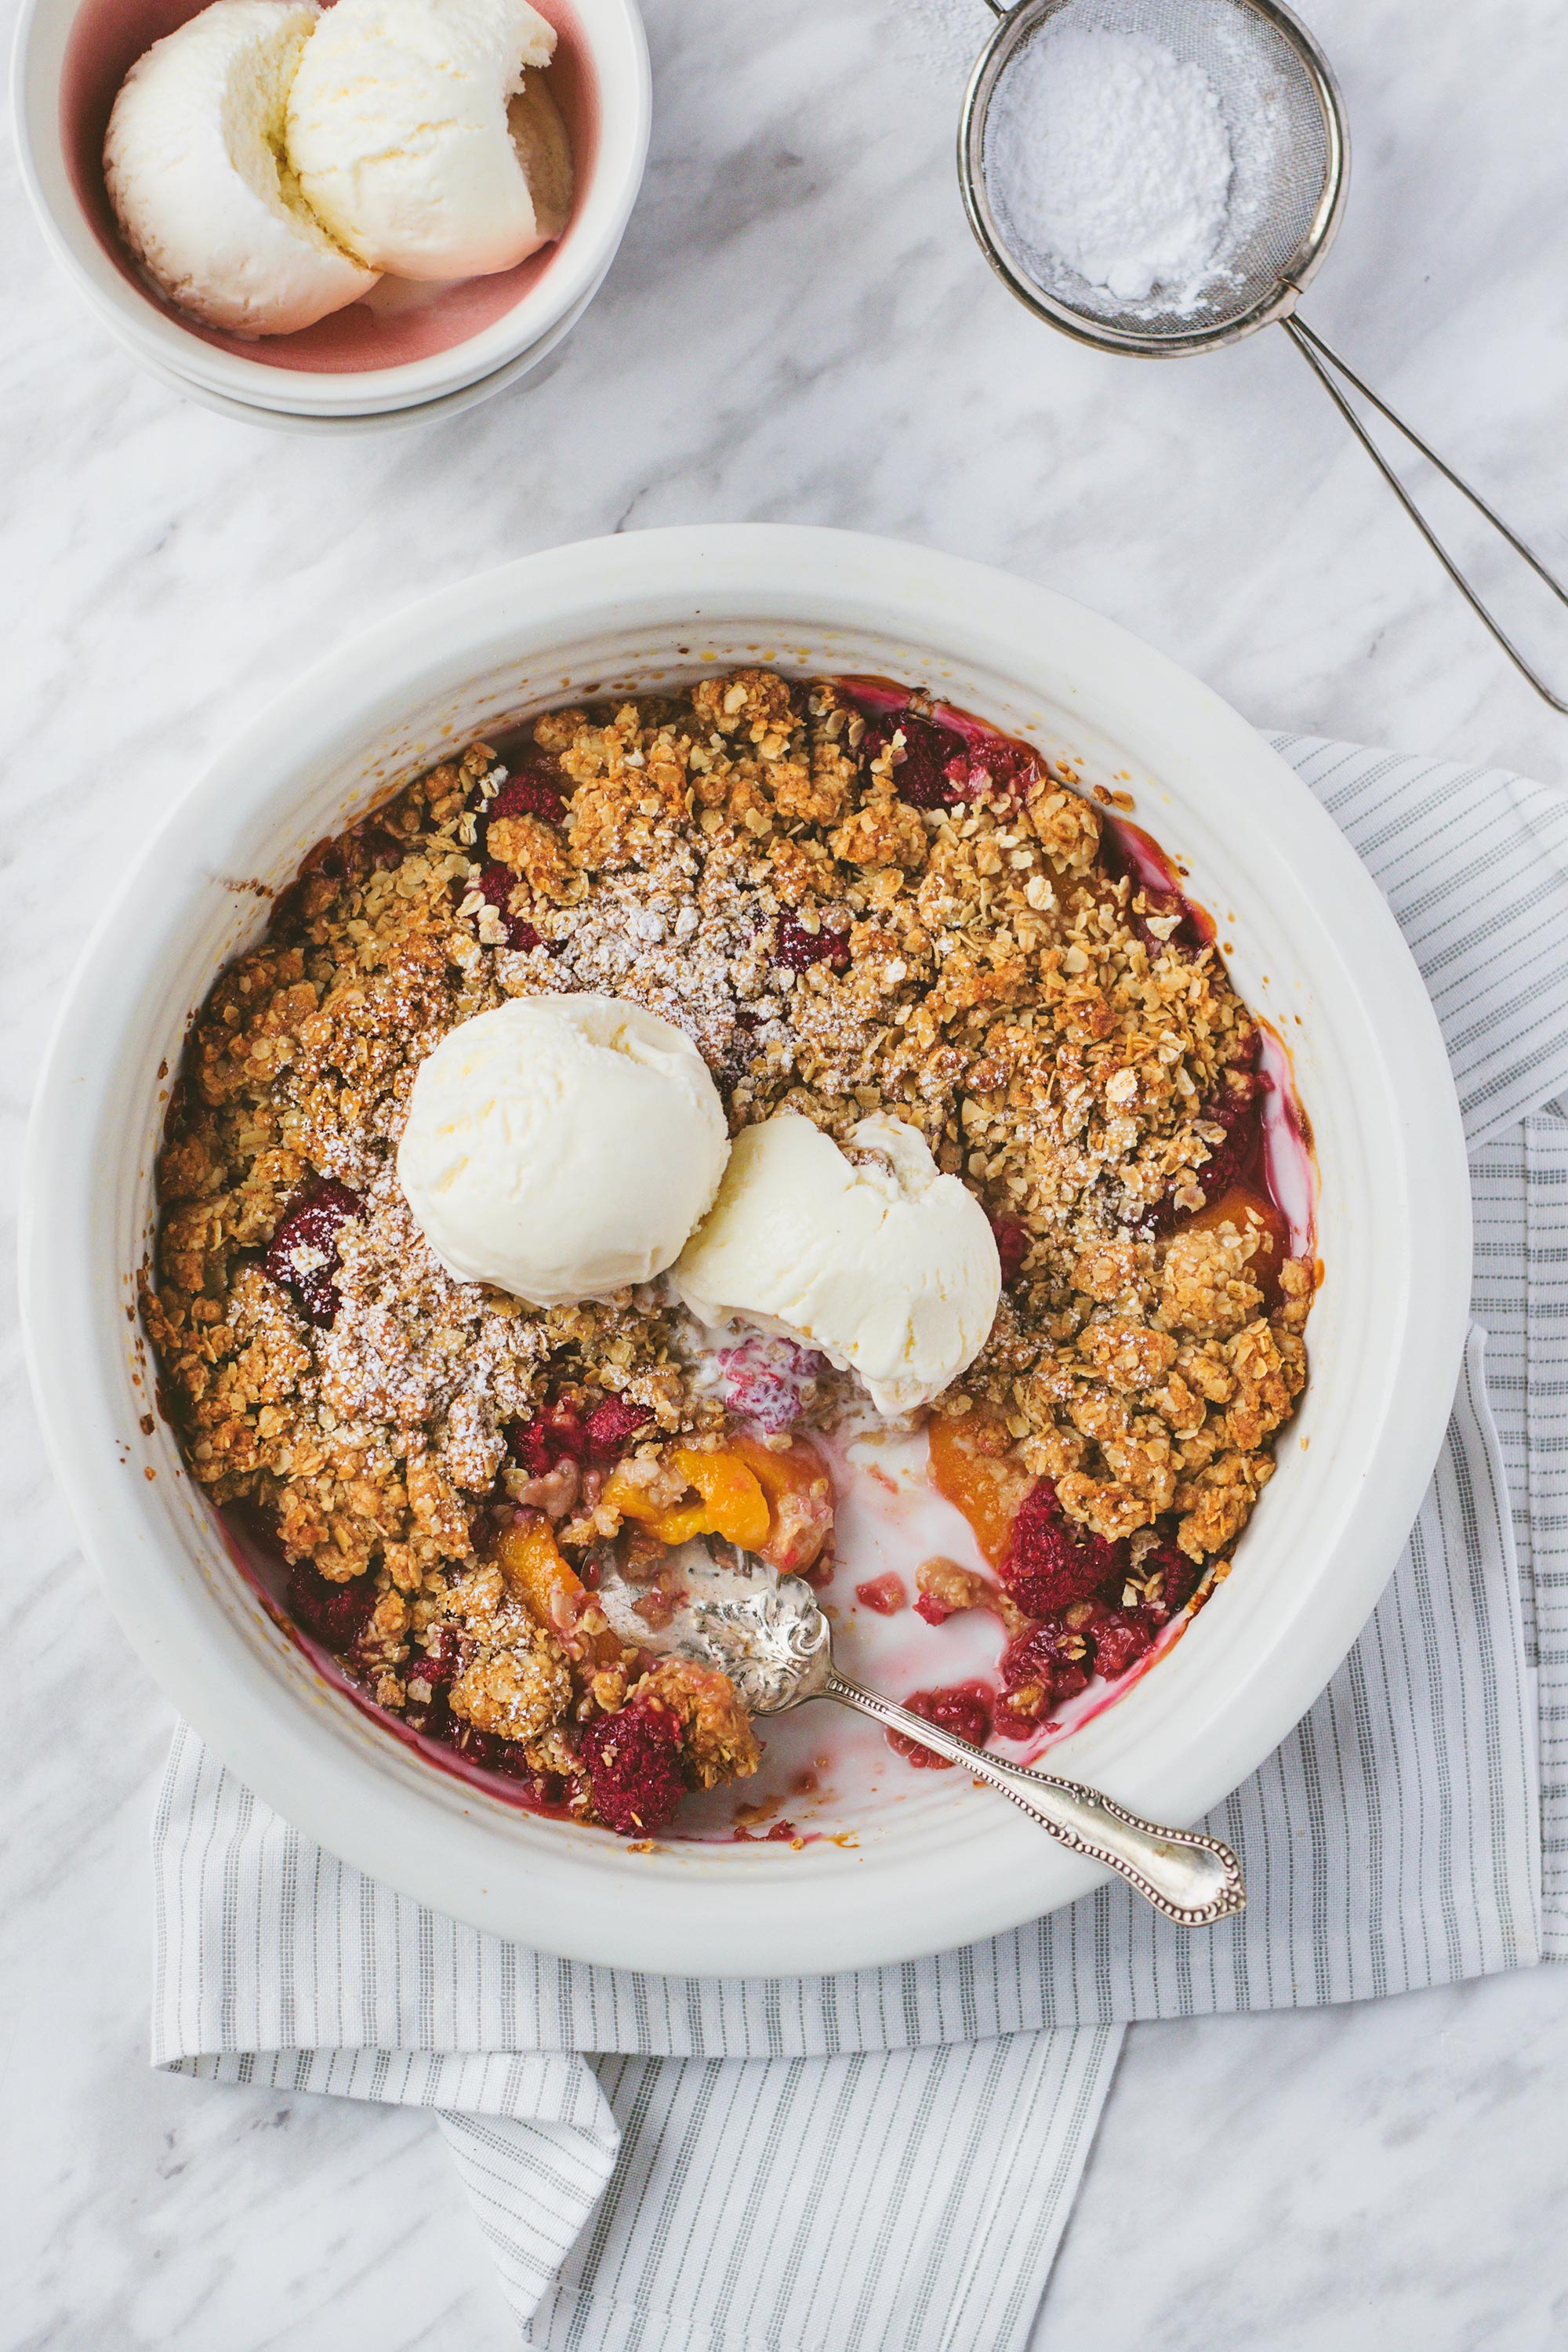 Peach and Raspberry Crisp for Valentine's Day